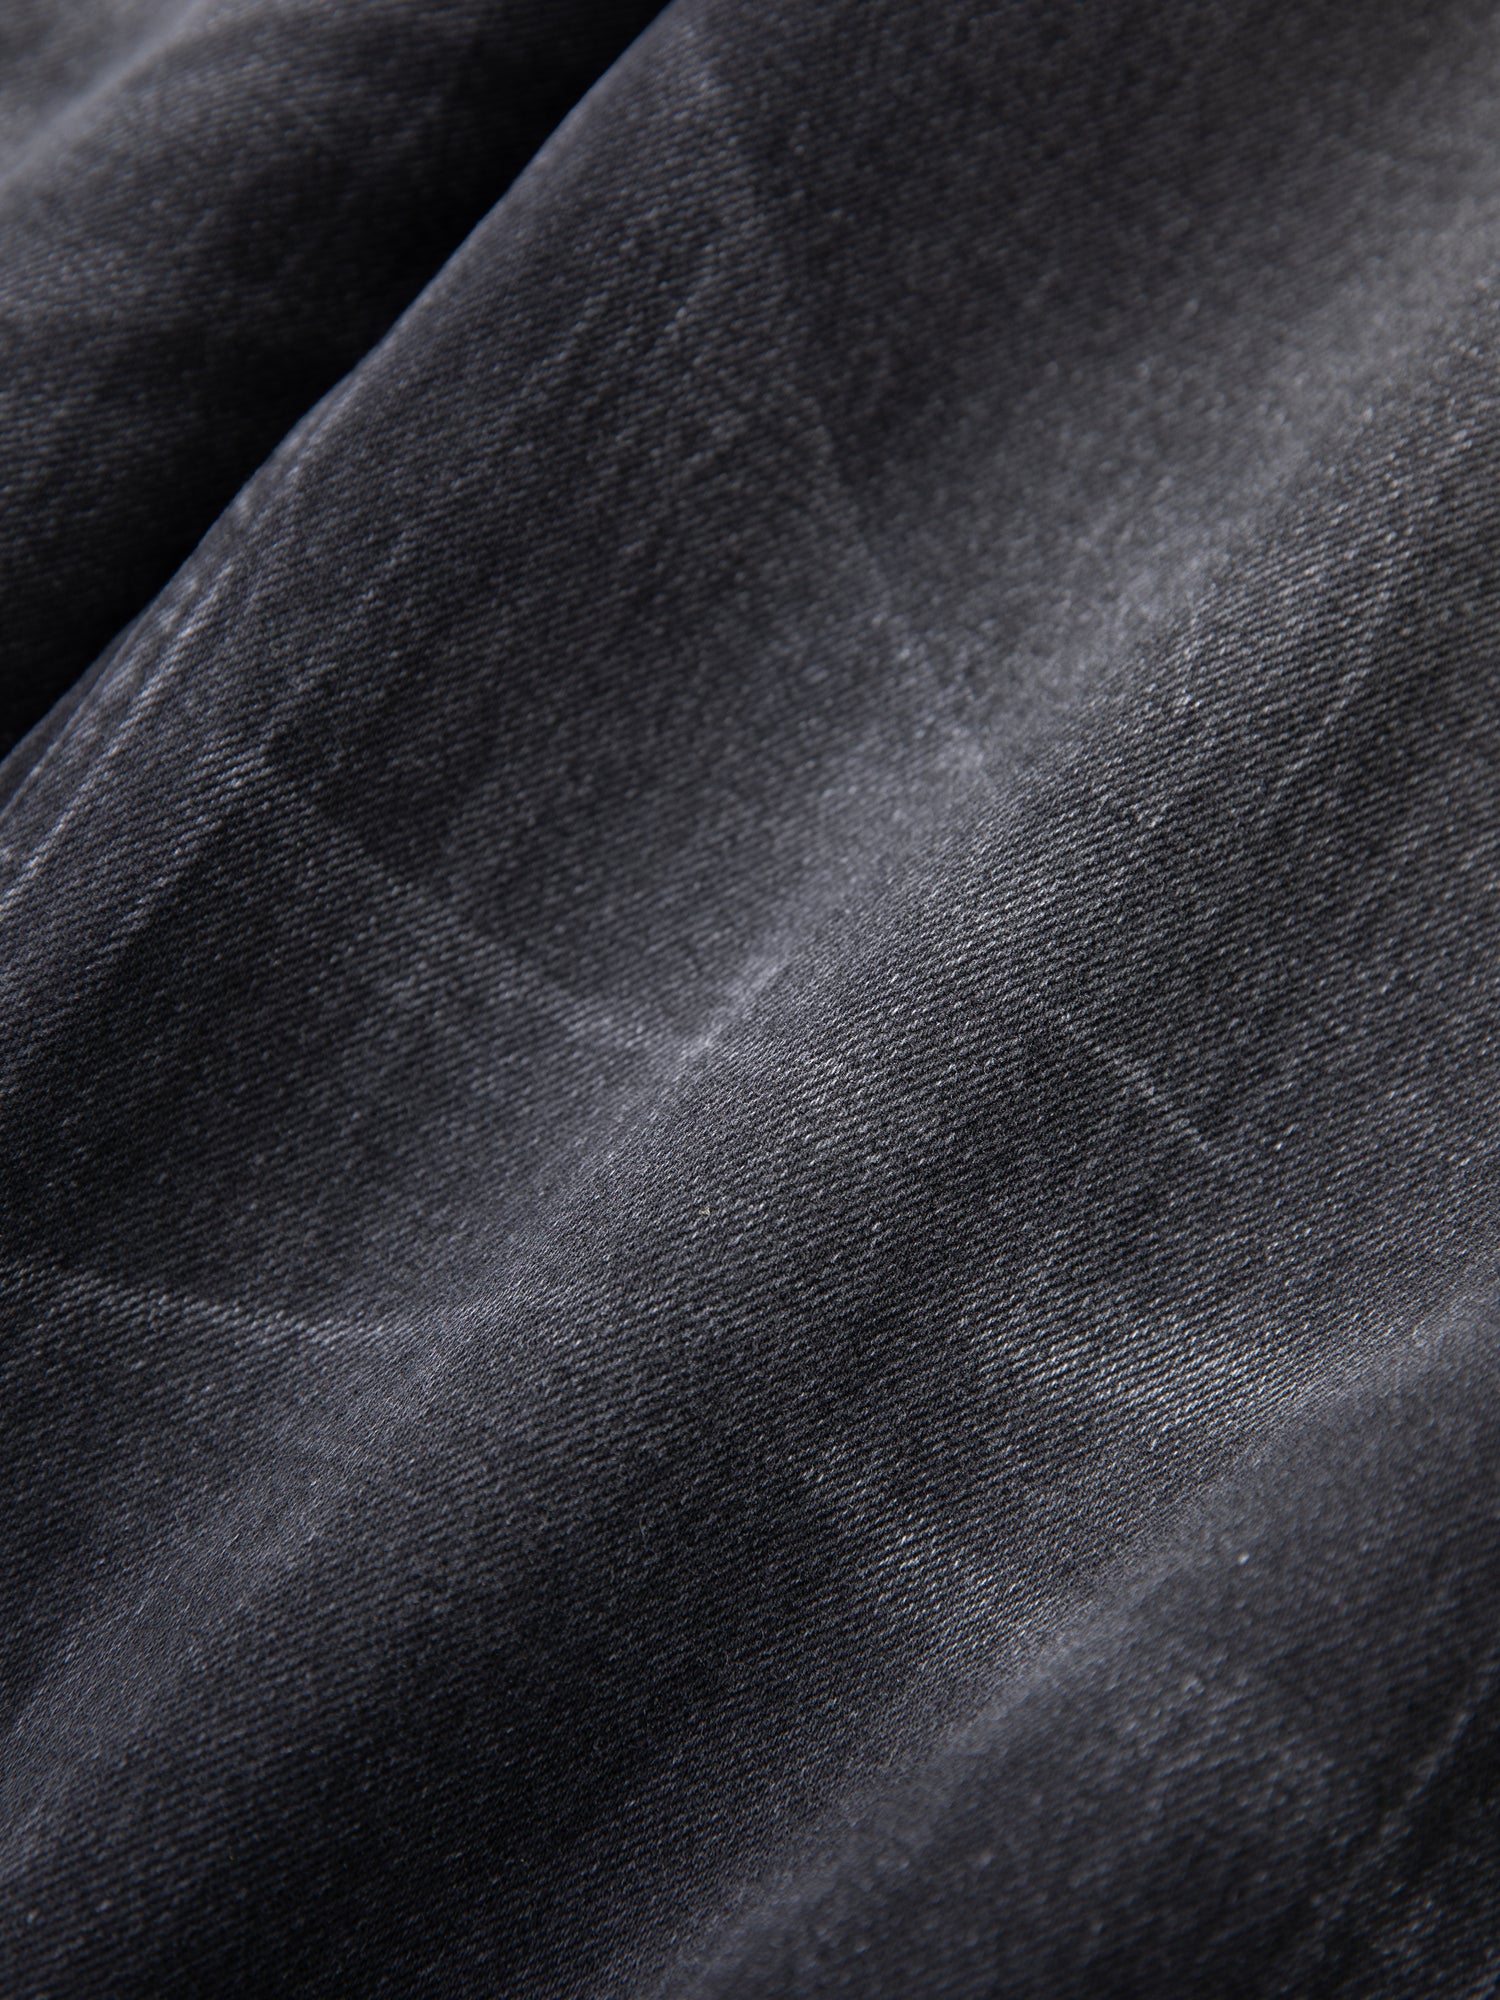 A close-up image of Found's Lacy Baggy Jeans in black wash fabric.